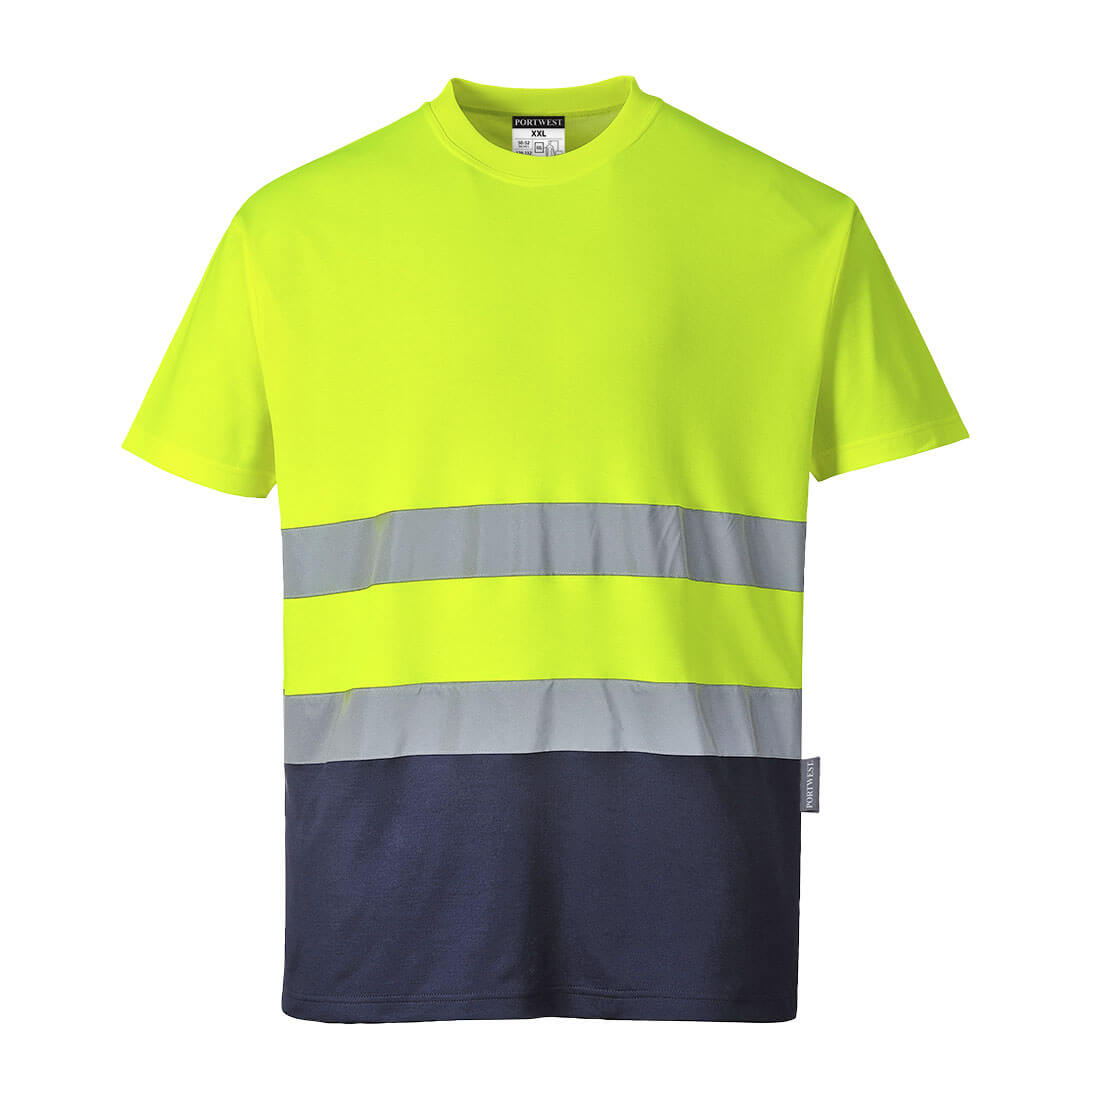 Two Tone Cotton Comfort T-Shirt - Yellow/Navy